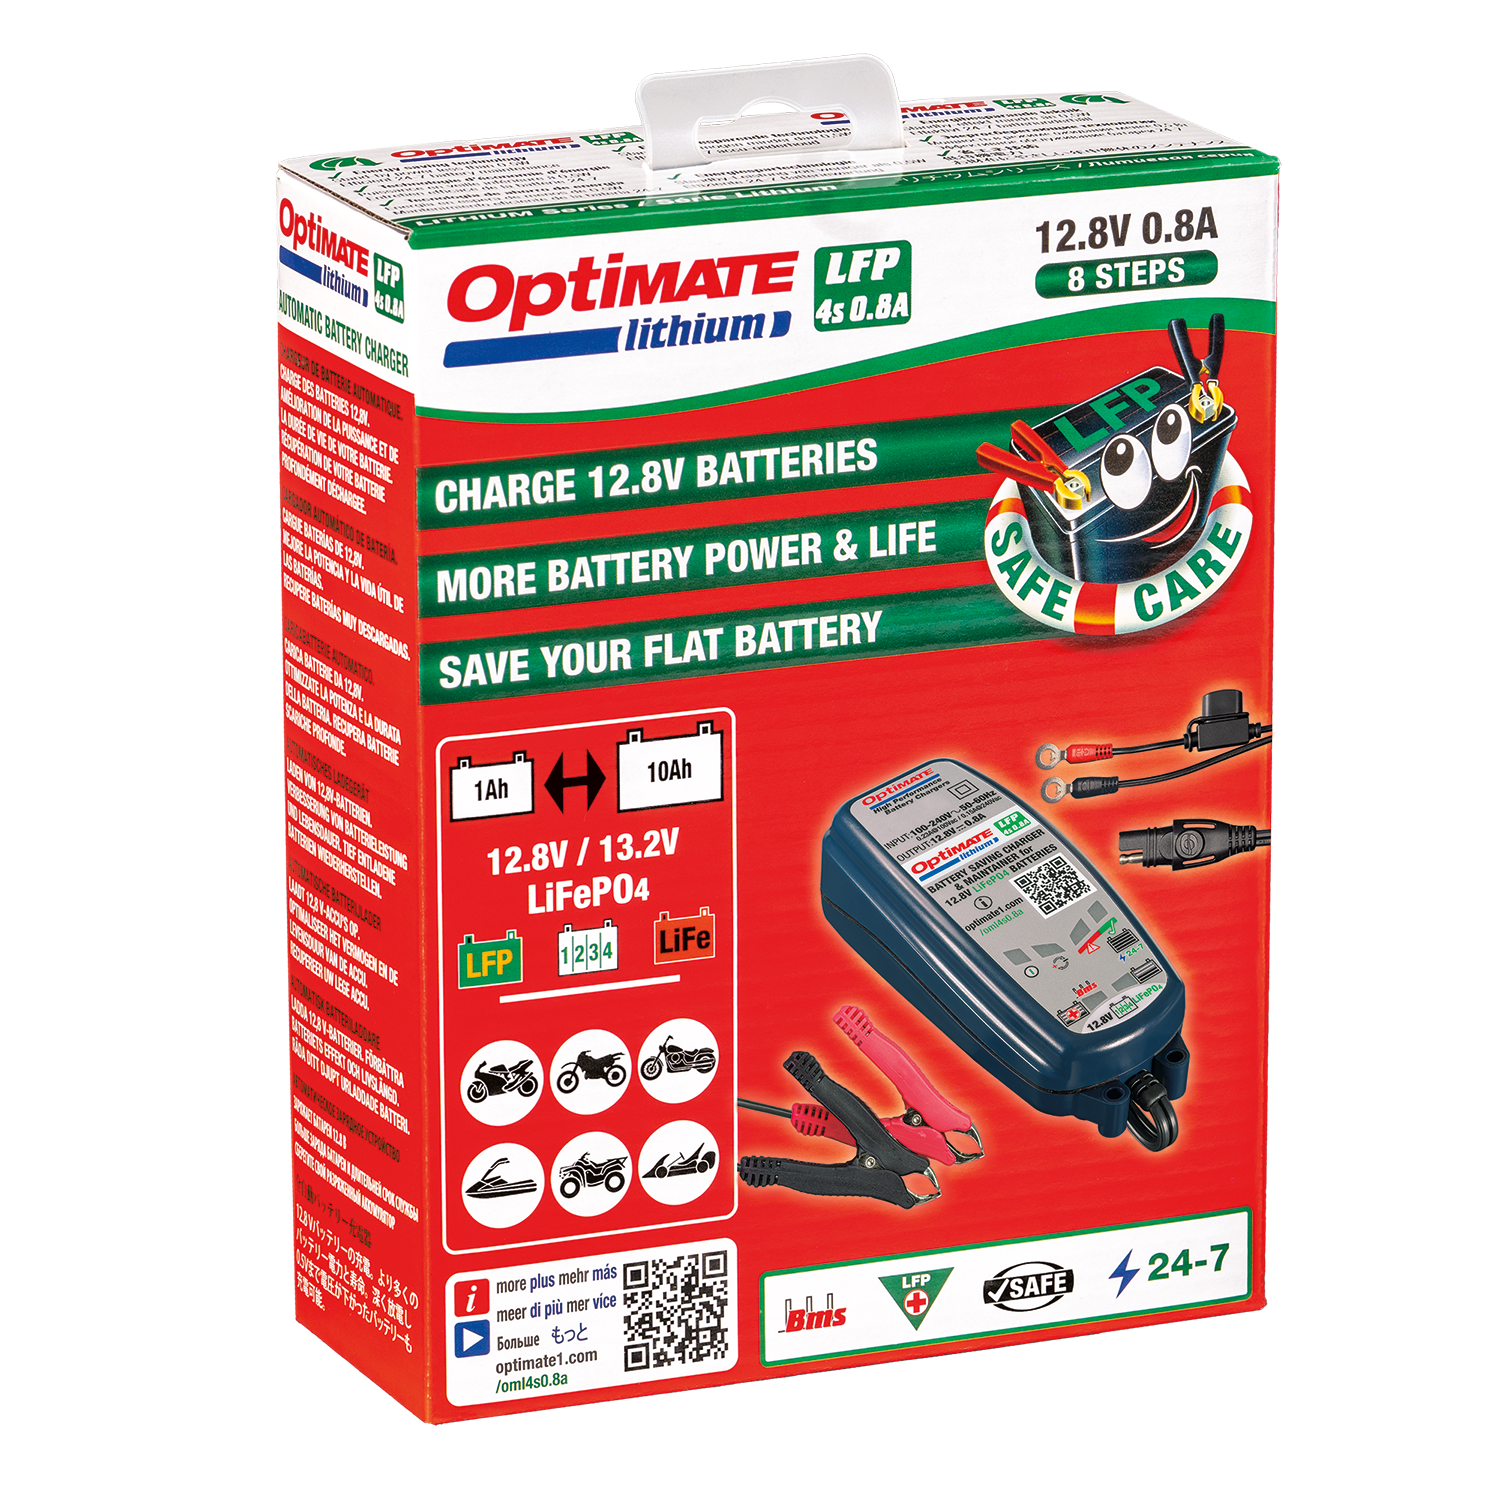 OptiMate Lithium 4s 0.8A – テックメイトジャパン㈱ 公式HP OptiMate充電器